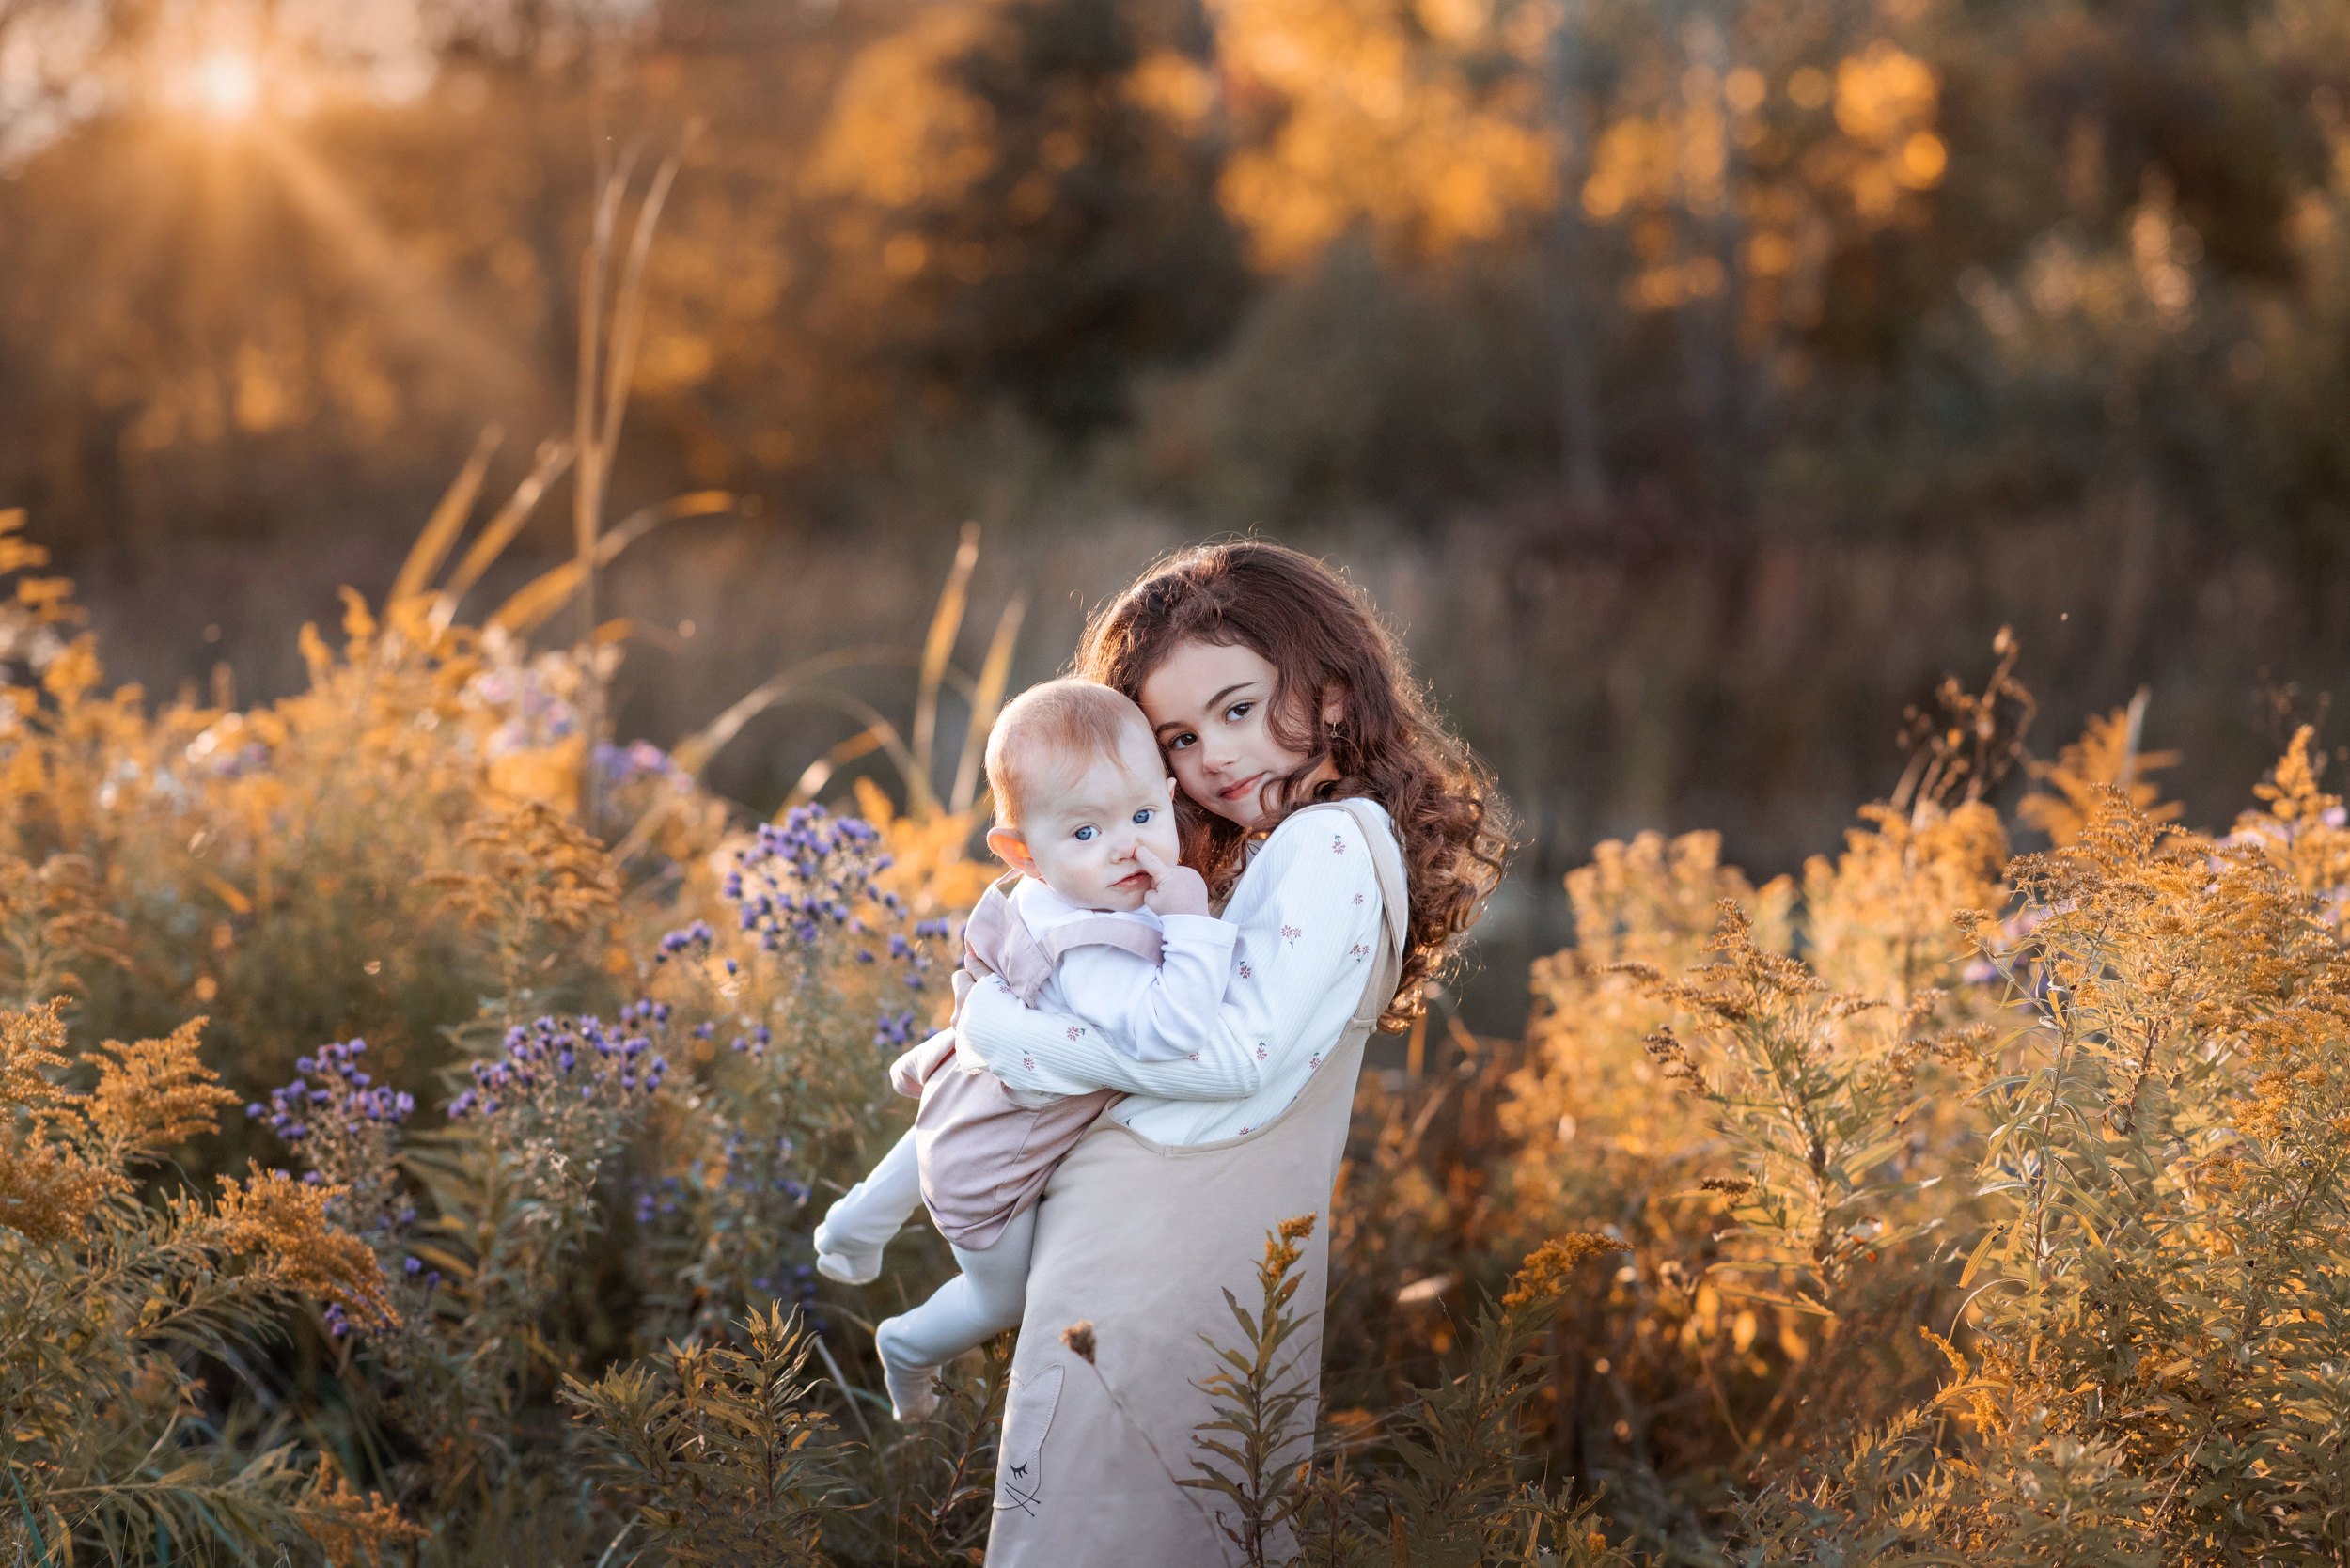 kids, baby, girls, family, spring, march, day light, sun, gold, red hairs, sisters, sunshine, love, Toronto, Moscow, Kostroma, New York, Canada, Nature, lockdown, face, portrait, flowers, warm, forest, March break, Irina Kornienko